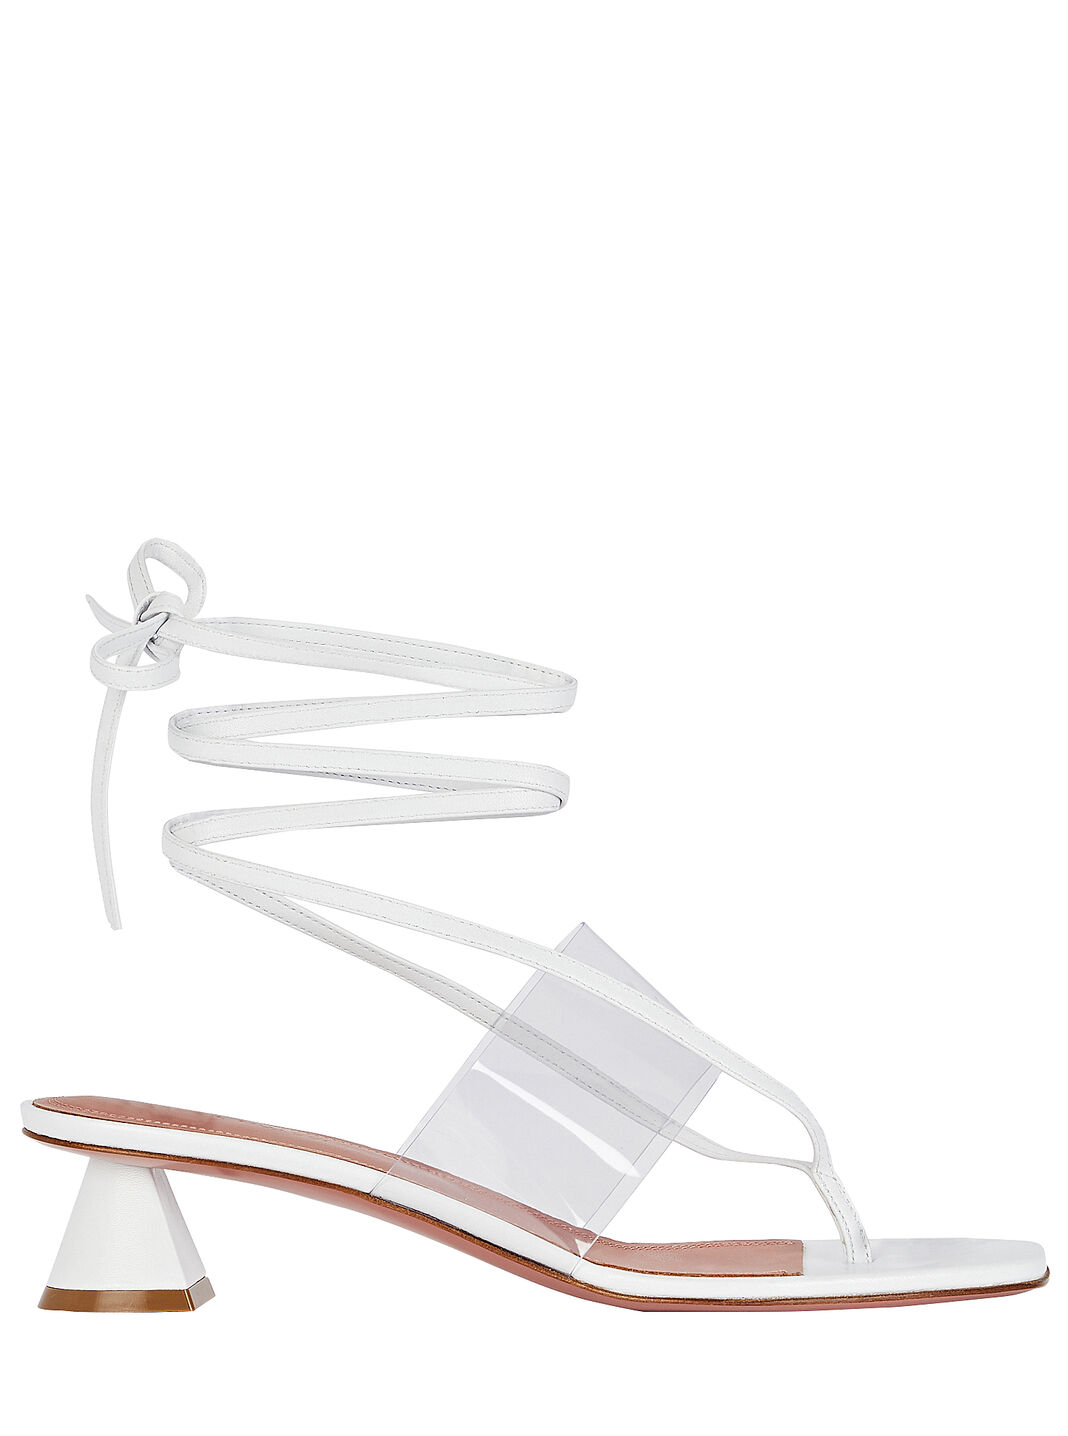 Zula Leather Thong Sandals